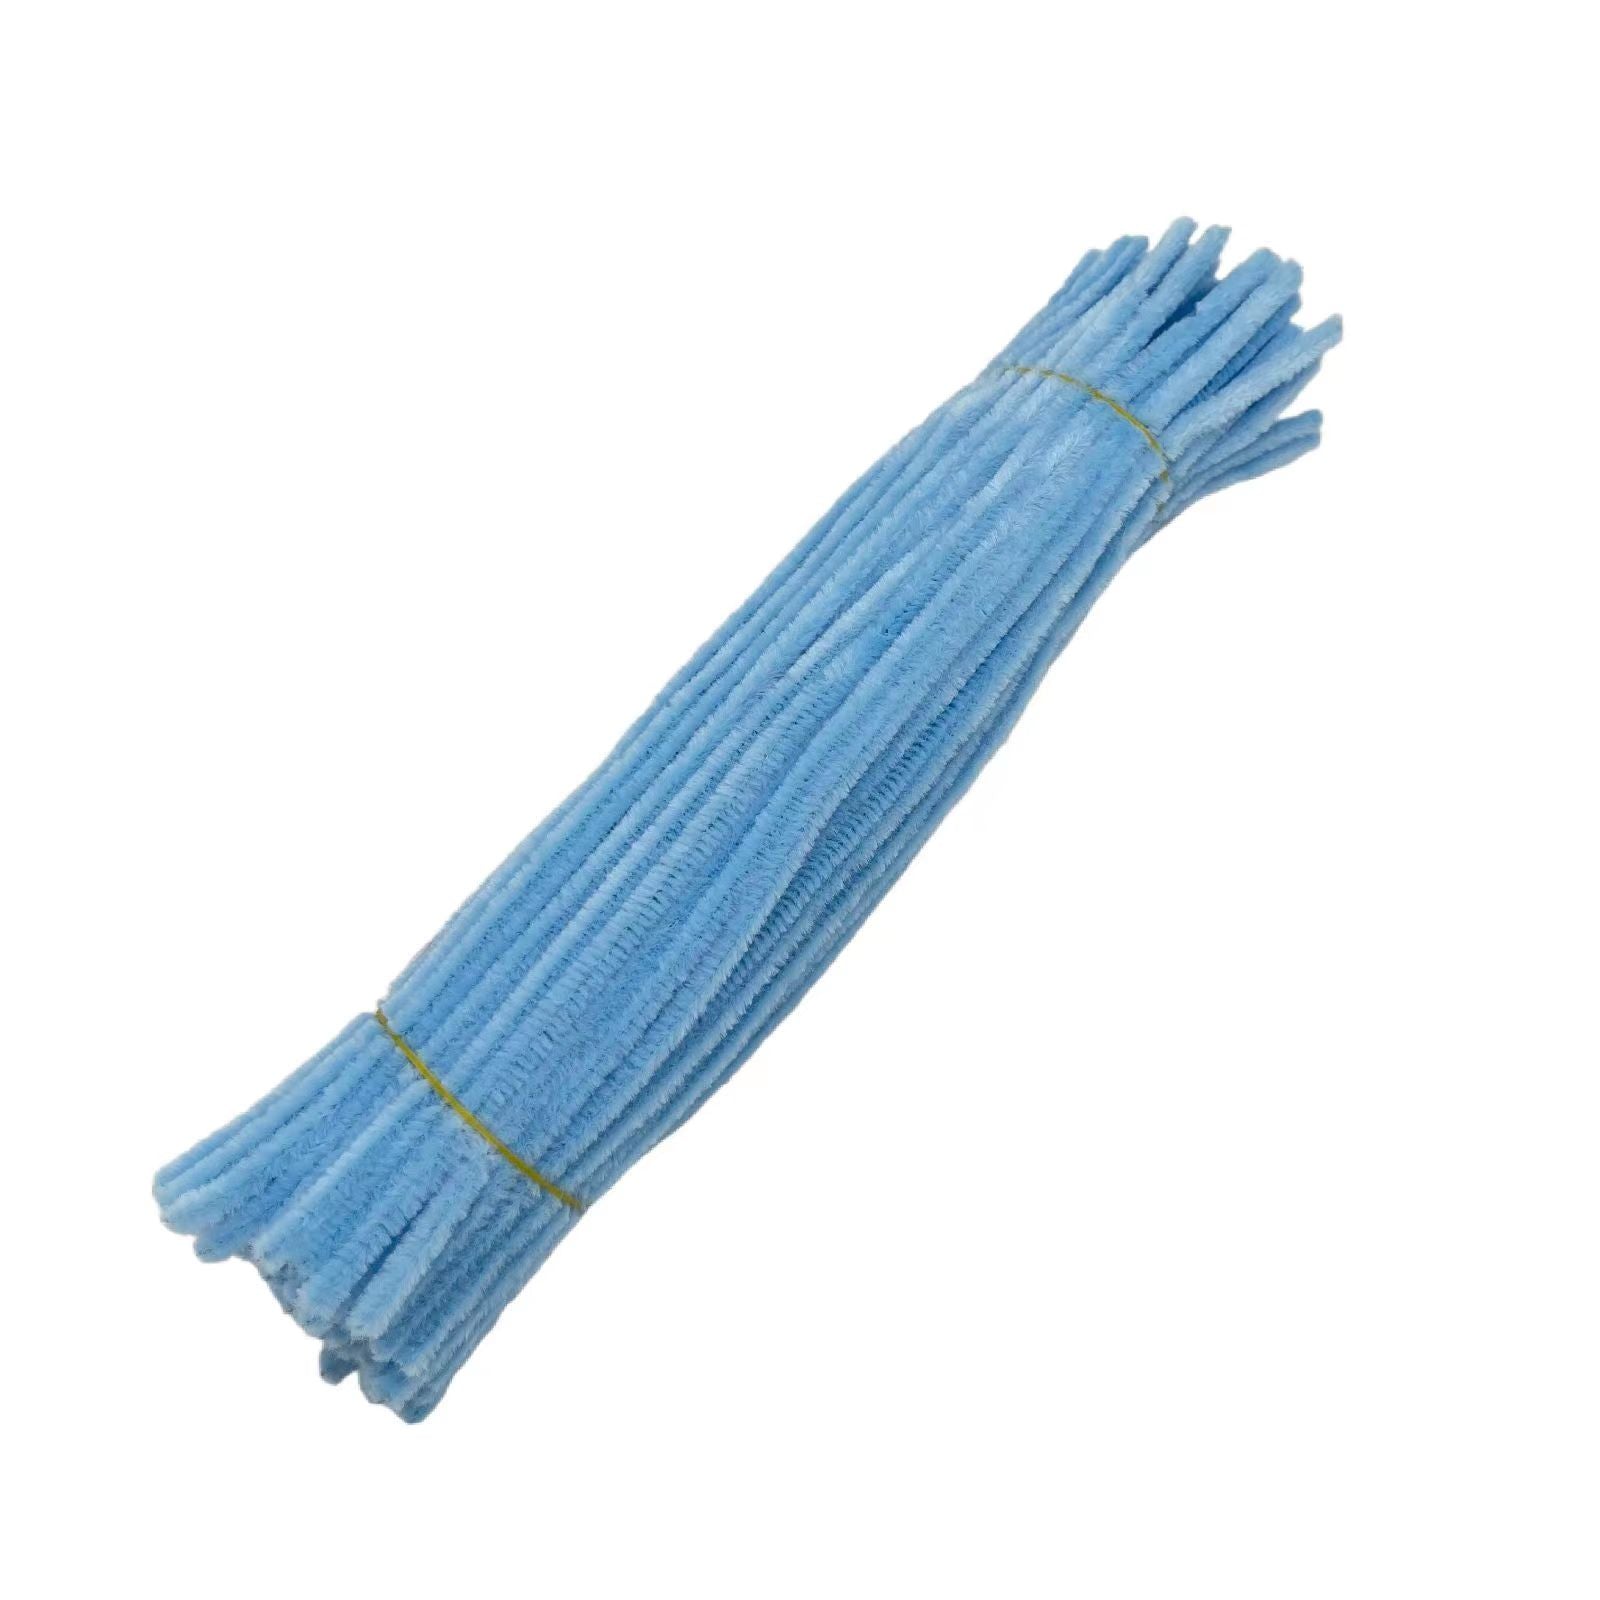 150 metallic gold Pipe Cleaners Craft Chenille Stems – BLUE SQUID USA